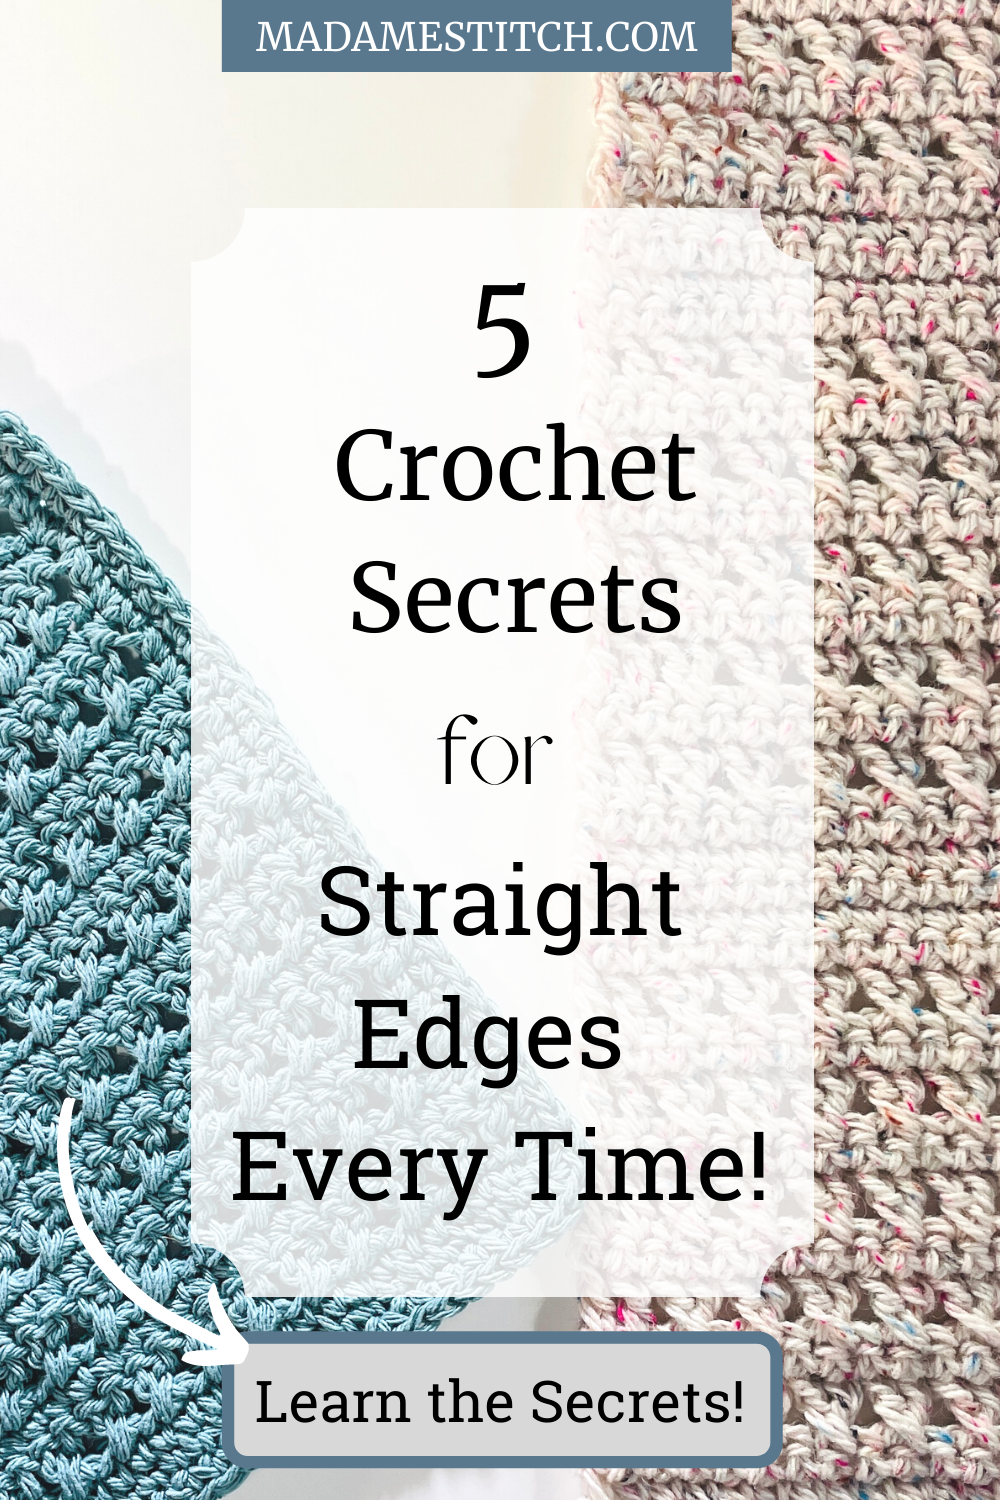 5 tips to crochet a straight edge every time